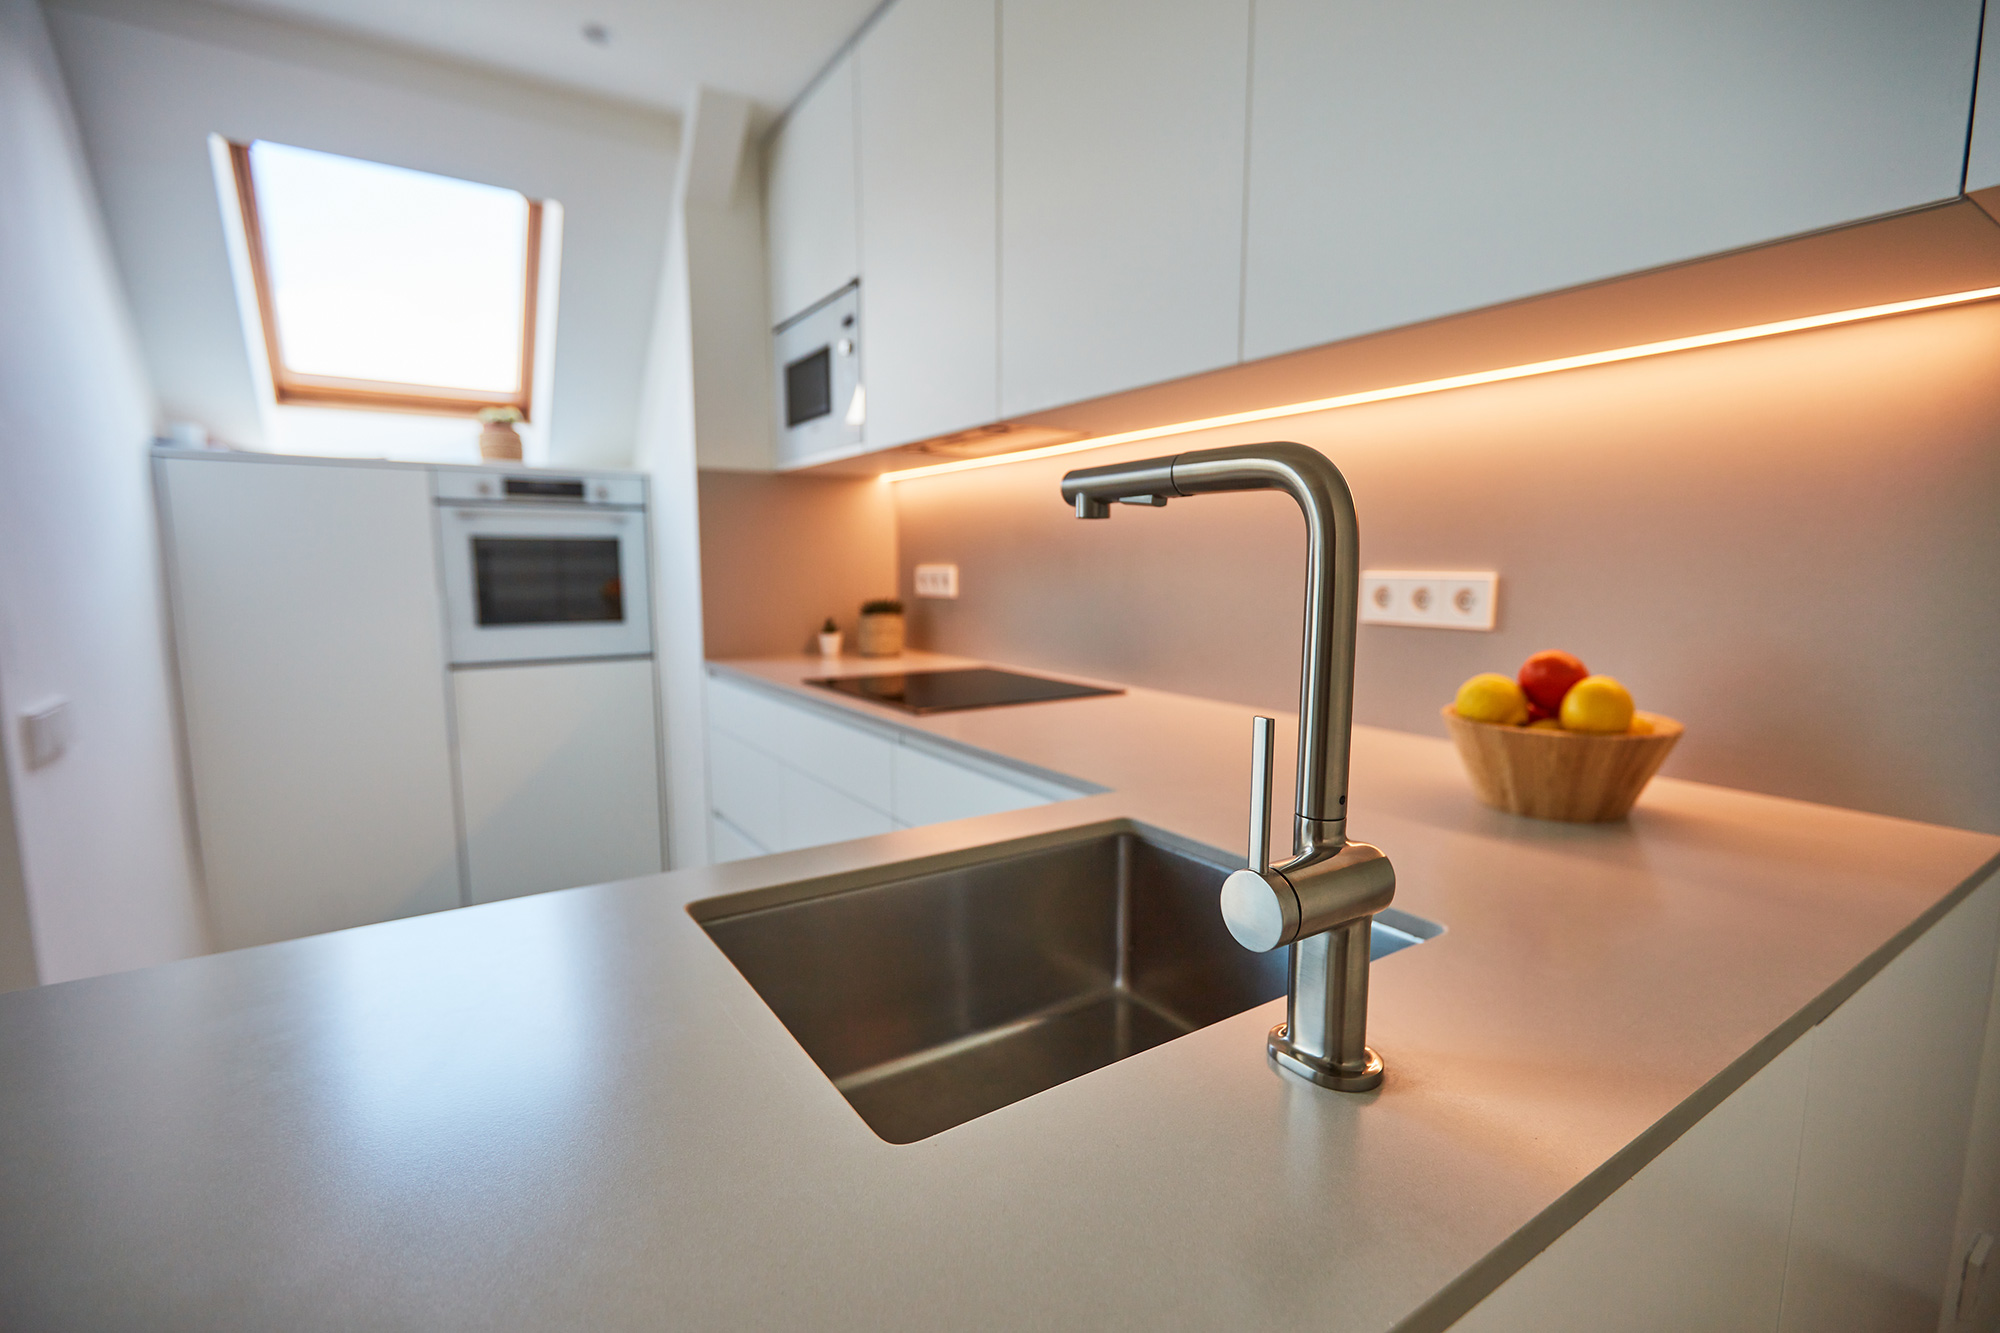 Image of balmes sobre atico duplex 25 in A duplex in Barcelona is brought back to life thanks to a bright, open-plan renovation, enhanced by the light tones of Silestone - Cosentino